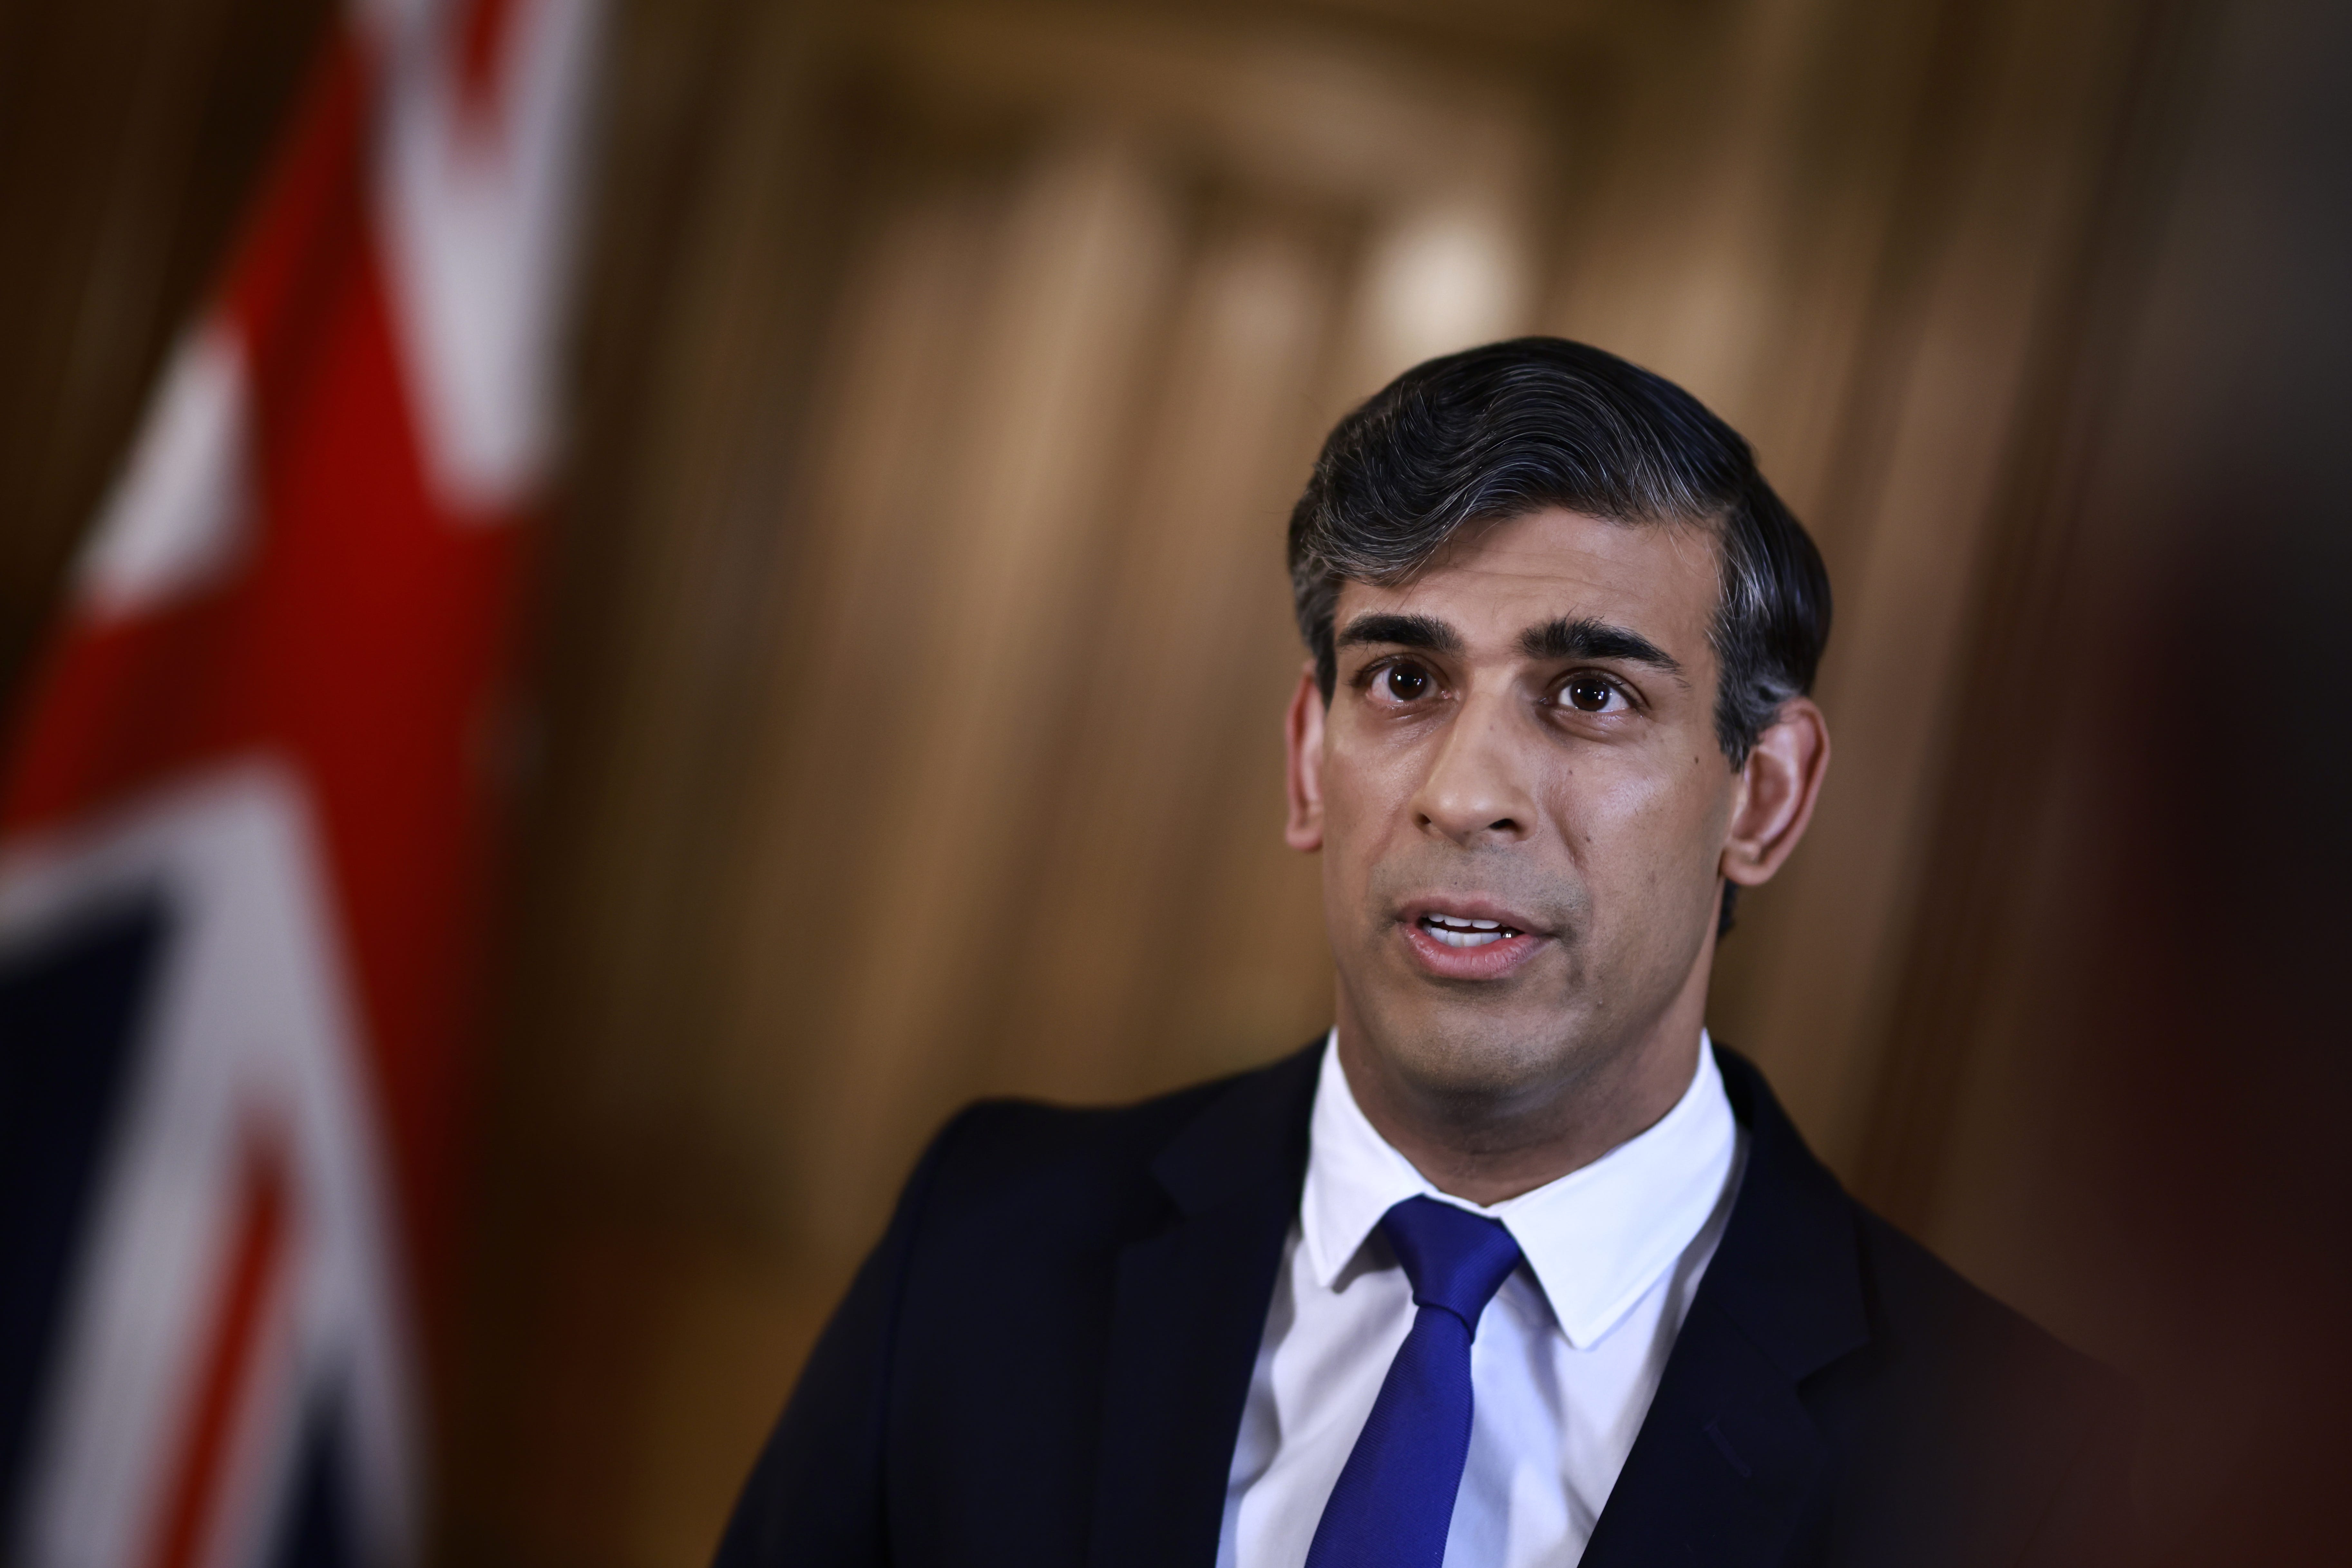 Rishi Sunak said if the attack had been successful ‘the fallout for regional stability would be hard to overstate’